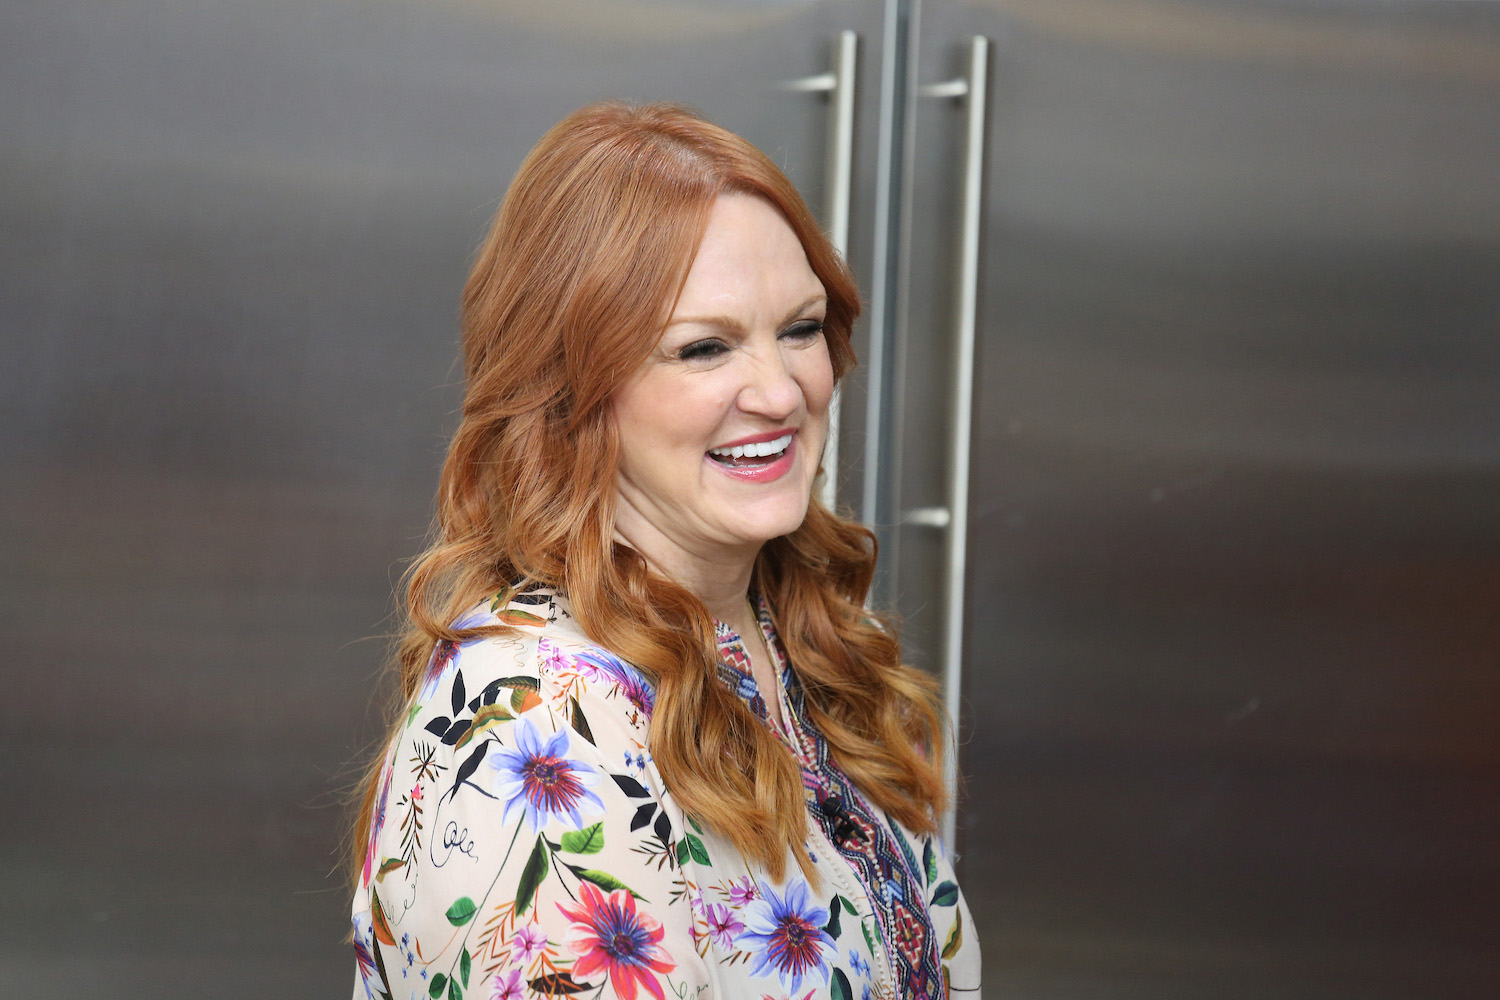 'The Pioneer Woman' Ree Drummond turns and smiles while wearing a bright shirt on the set of the 'Today' show in 2019